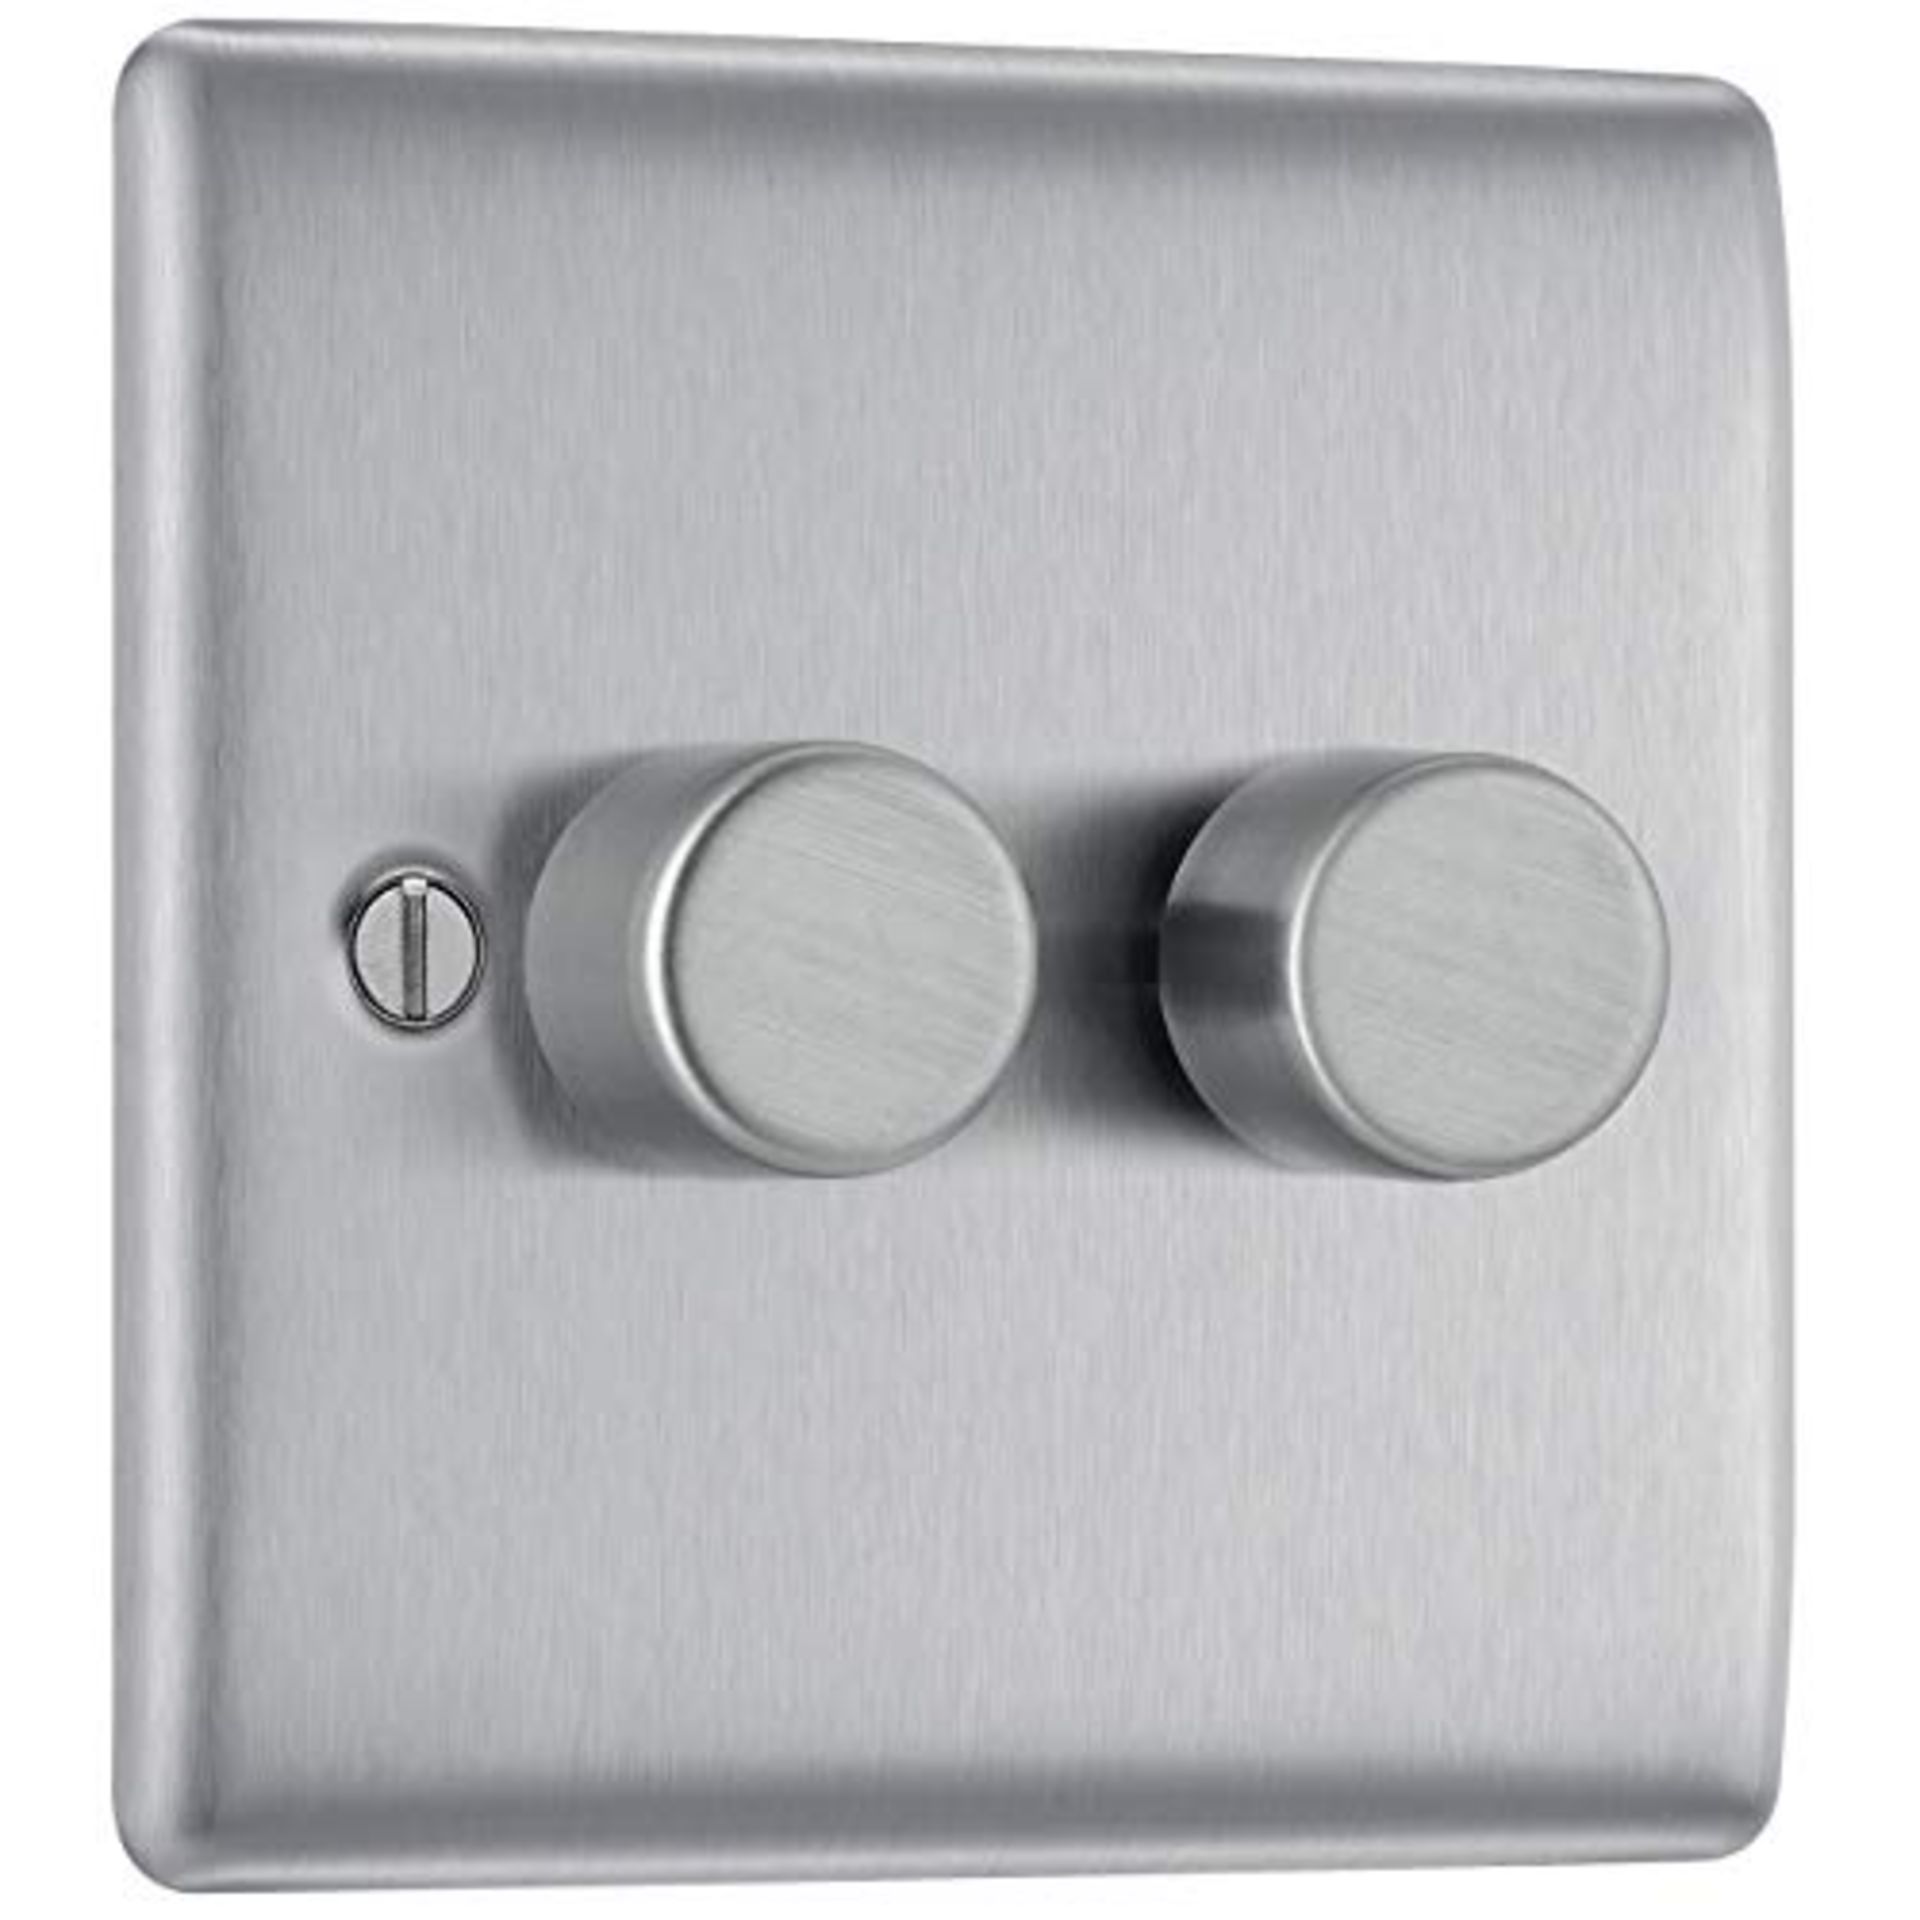 BG Electrical Double Dimmer Intelligent Light Switch, Brushed Steel, 2-Way